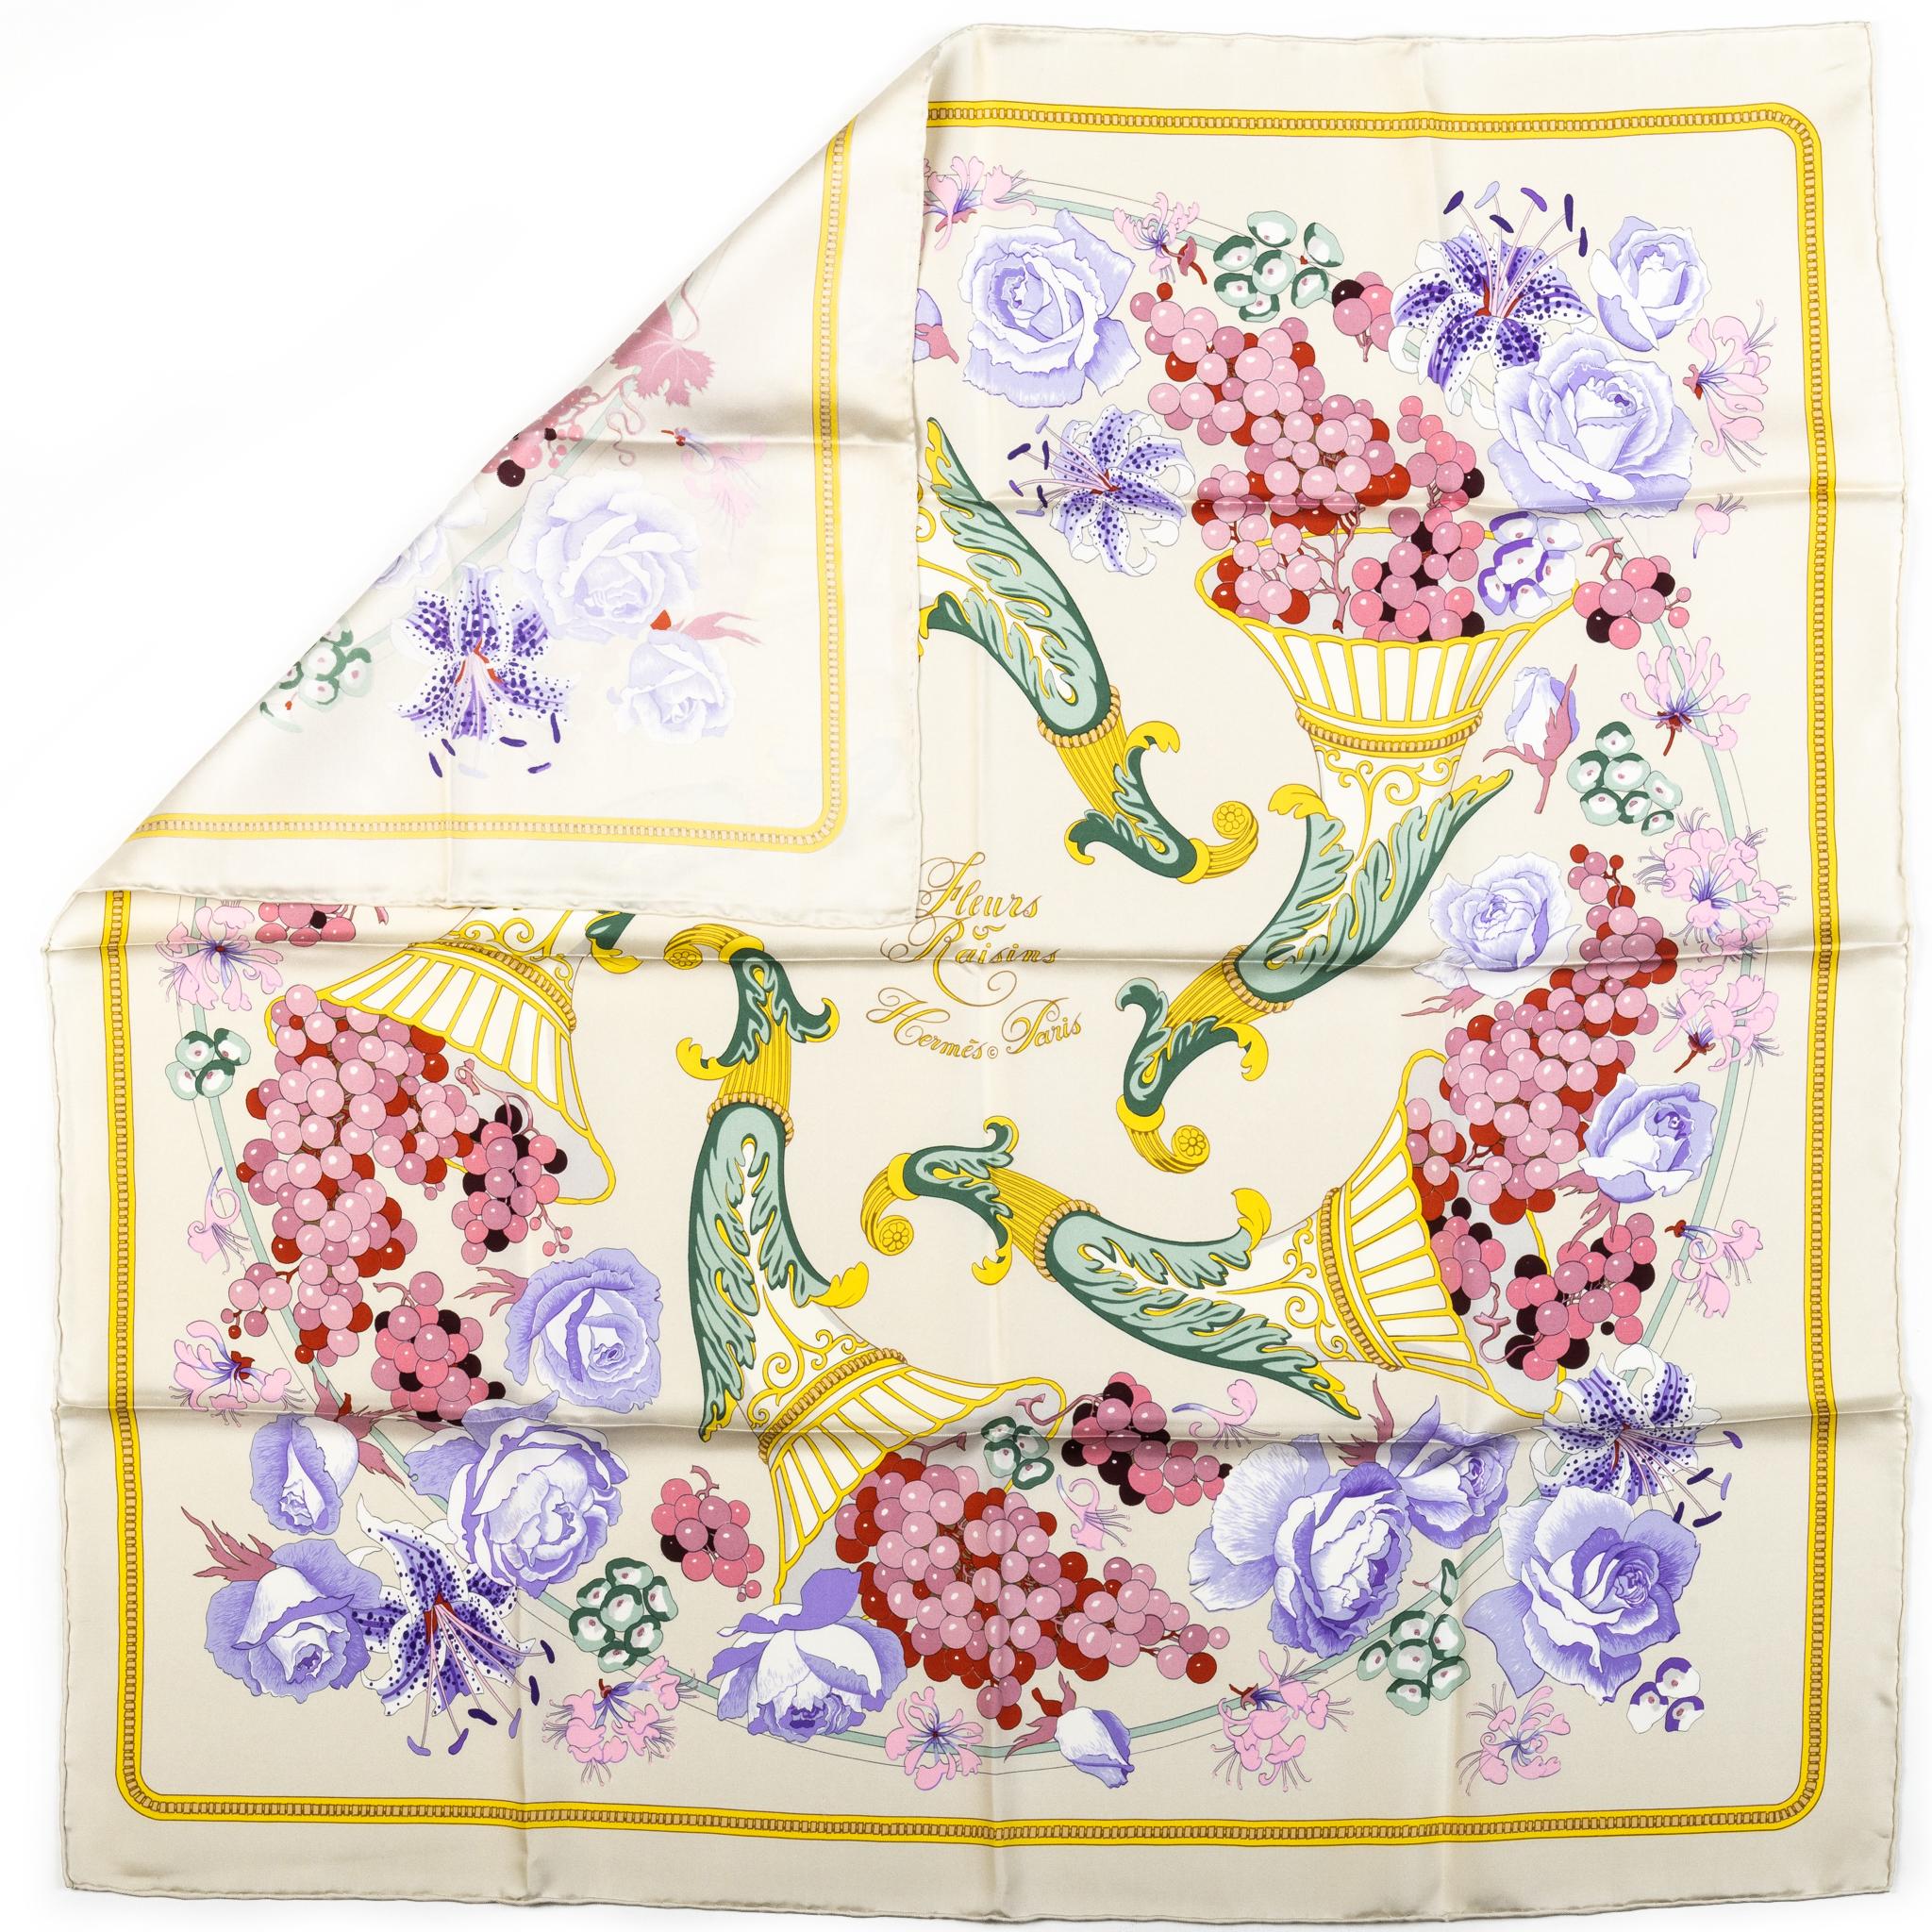 Hermes white floral cornucopia silk scarf. Hand rolled edges. No box included.